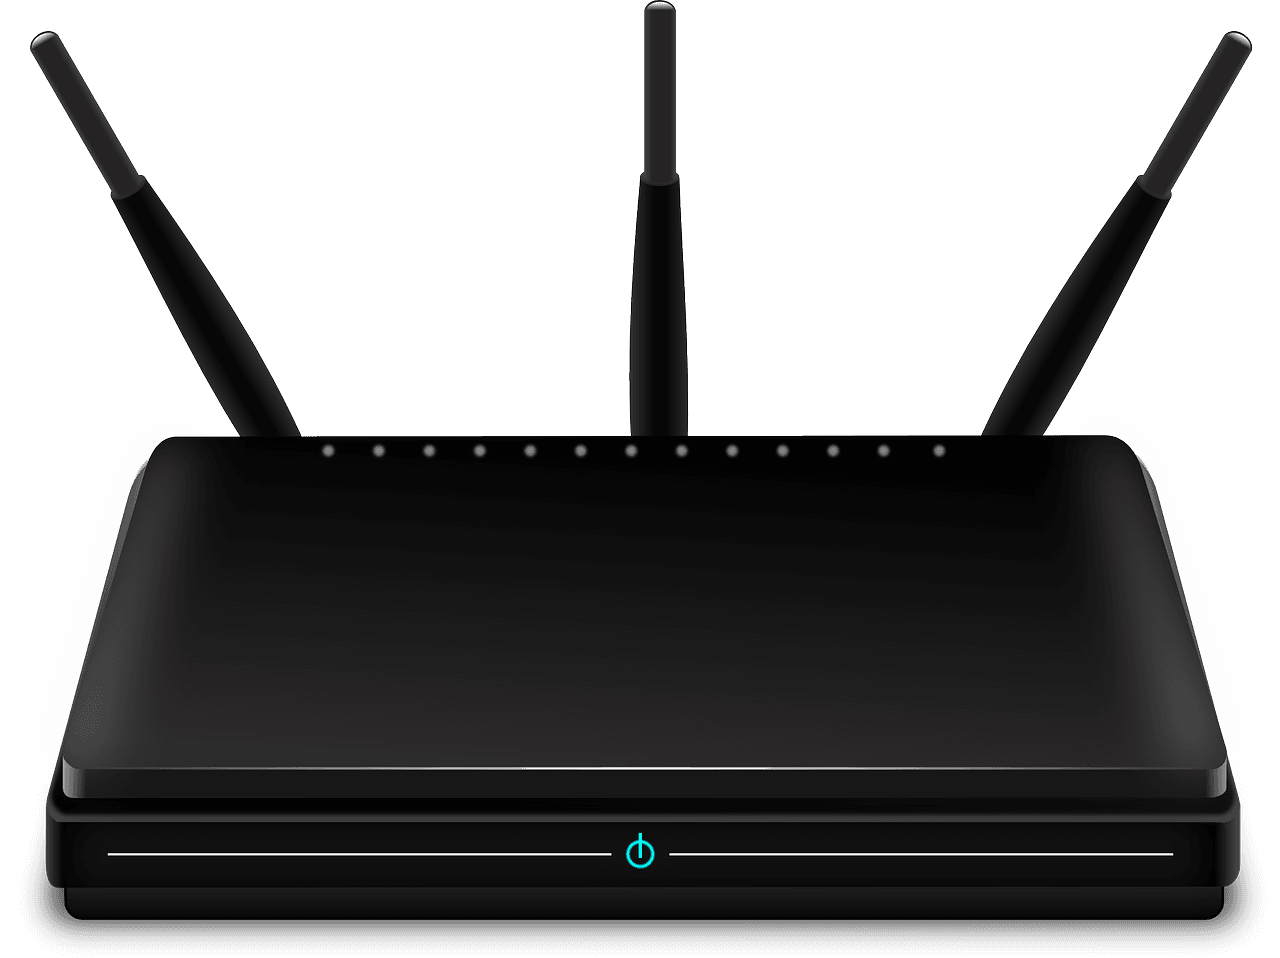 WiFi file transfer using router